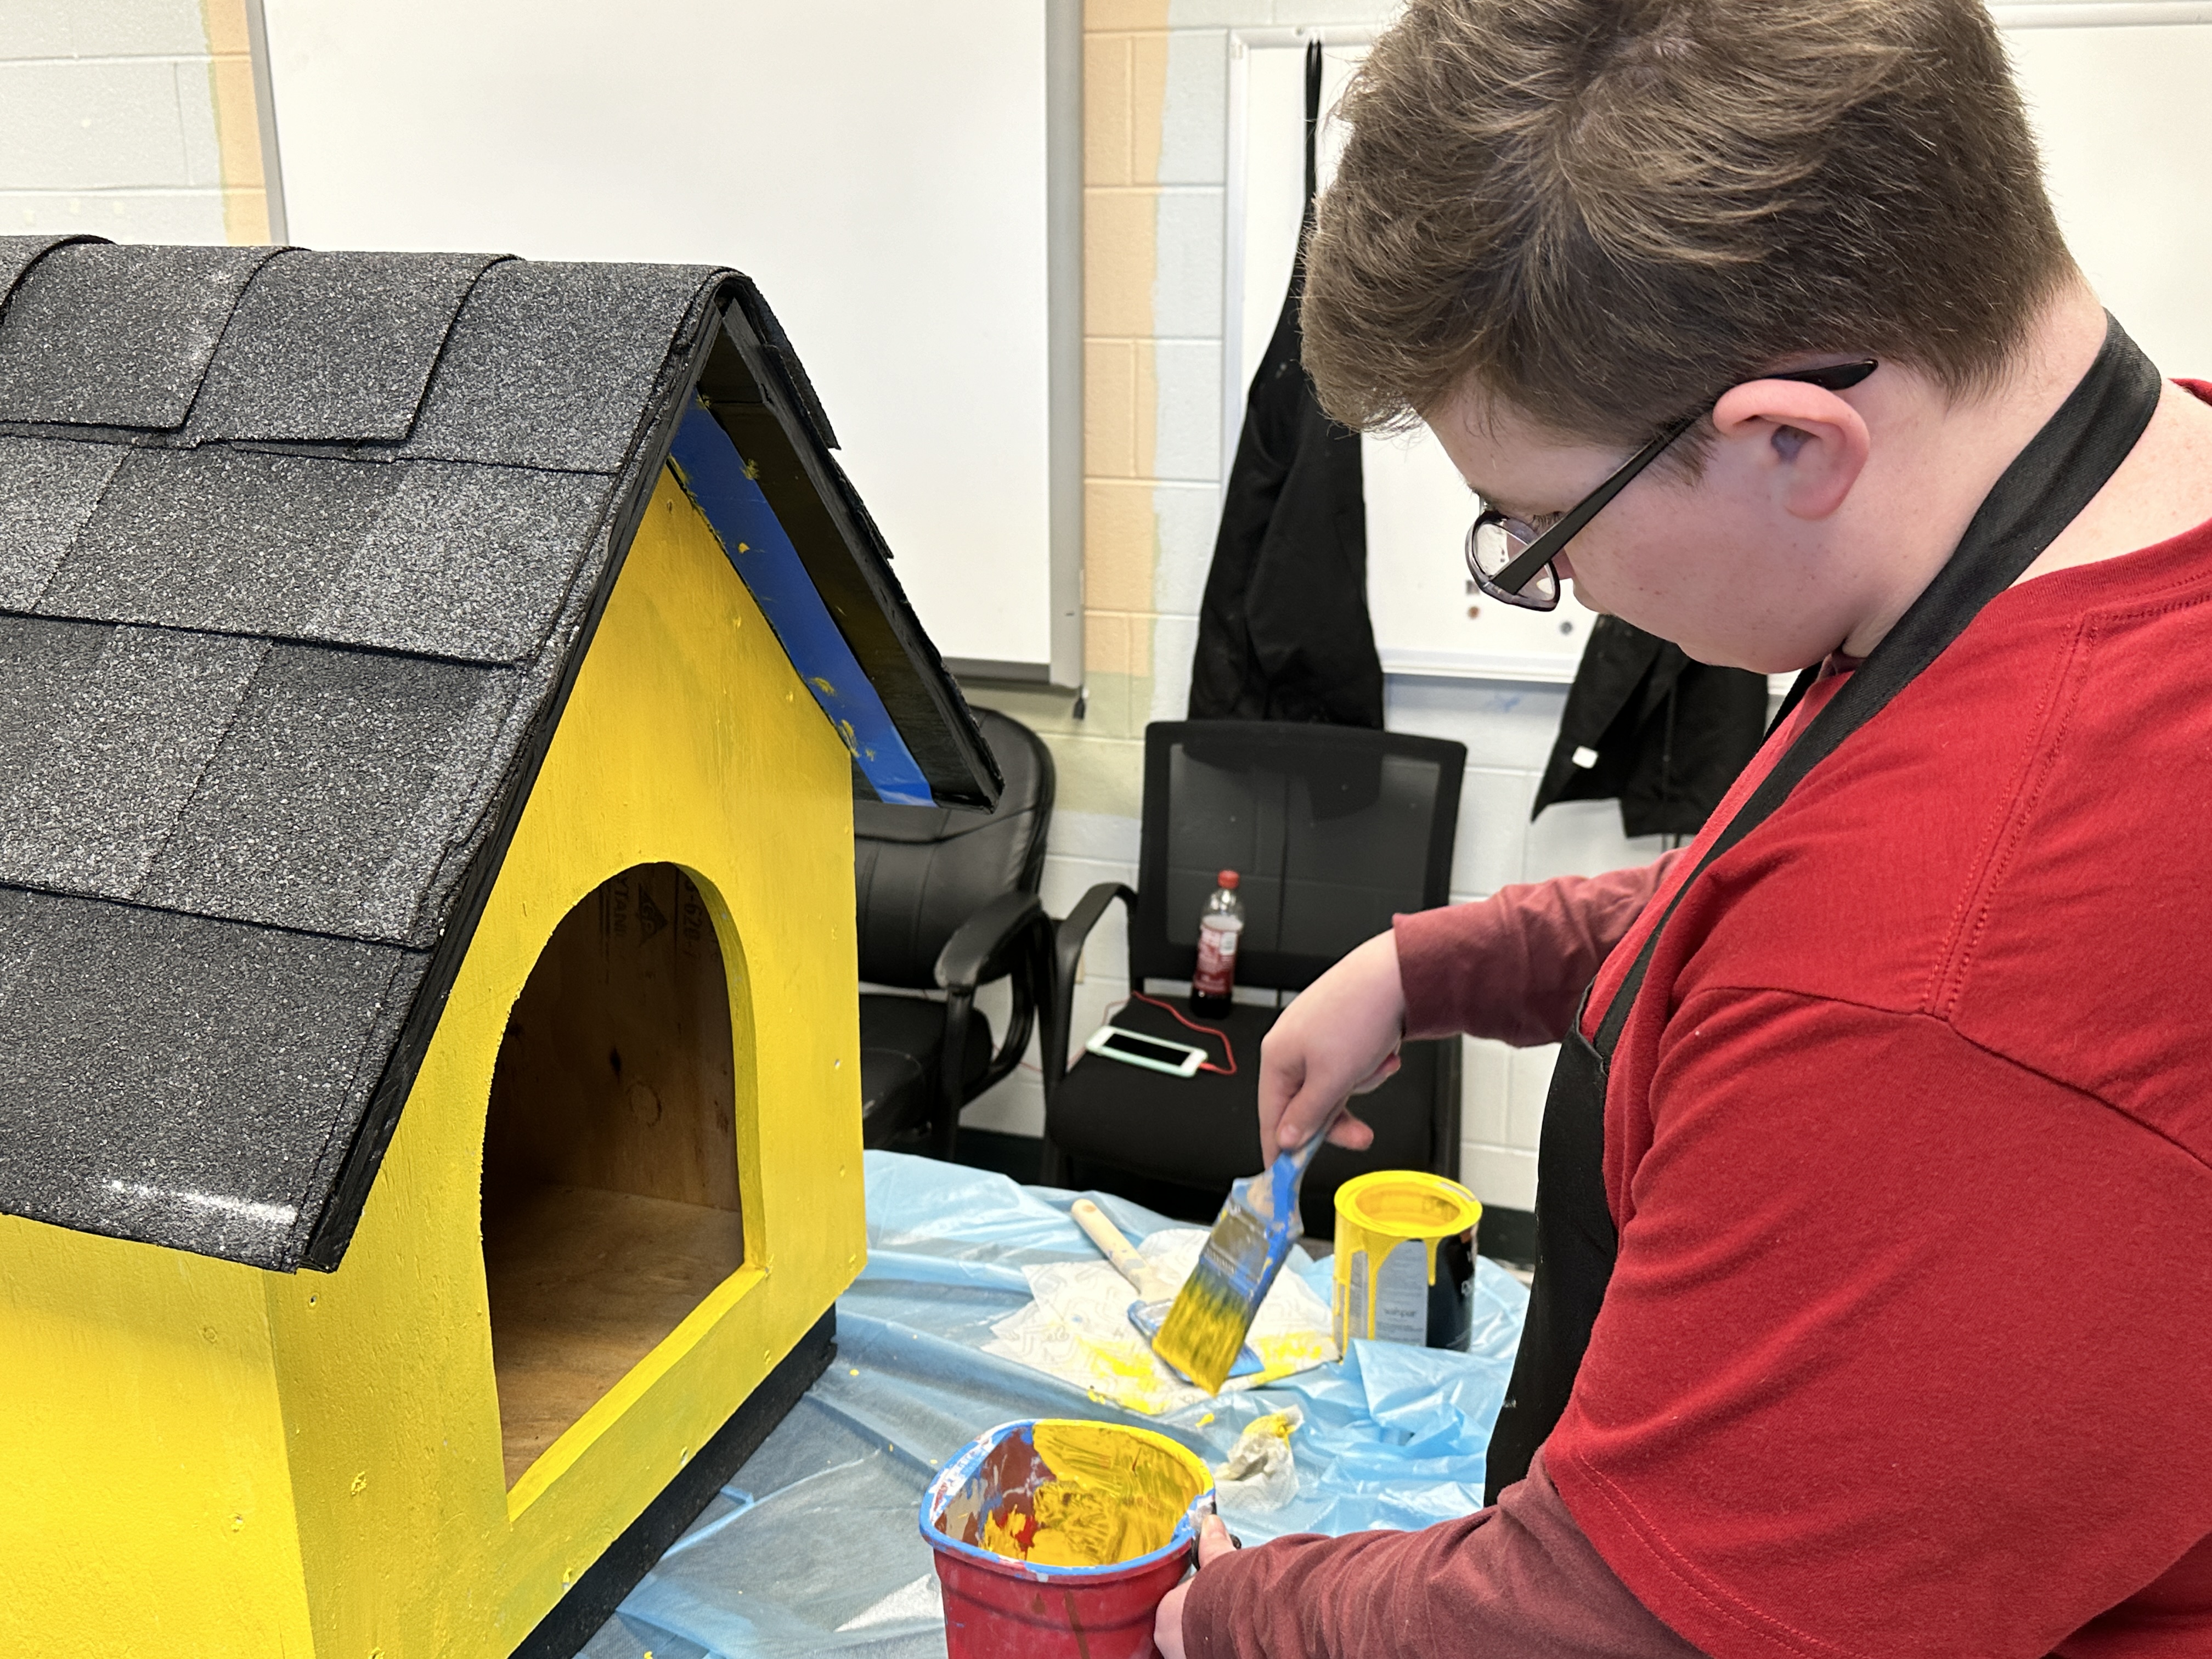 A boy paints a dog house bright yellow